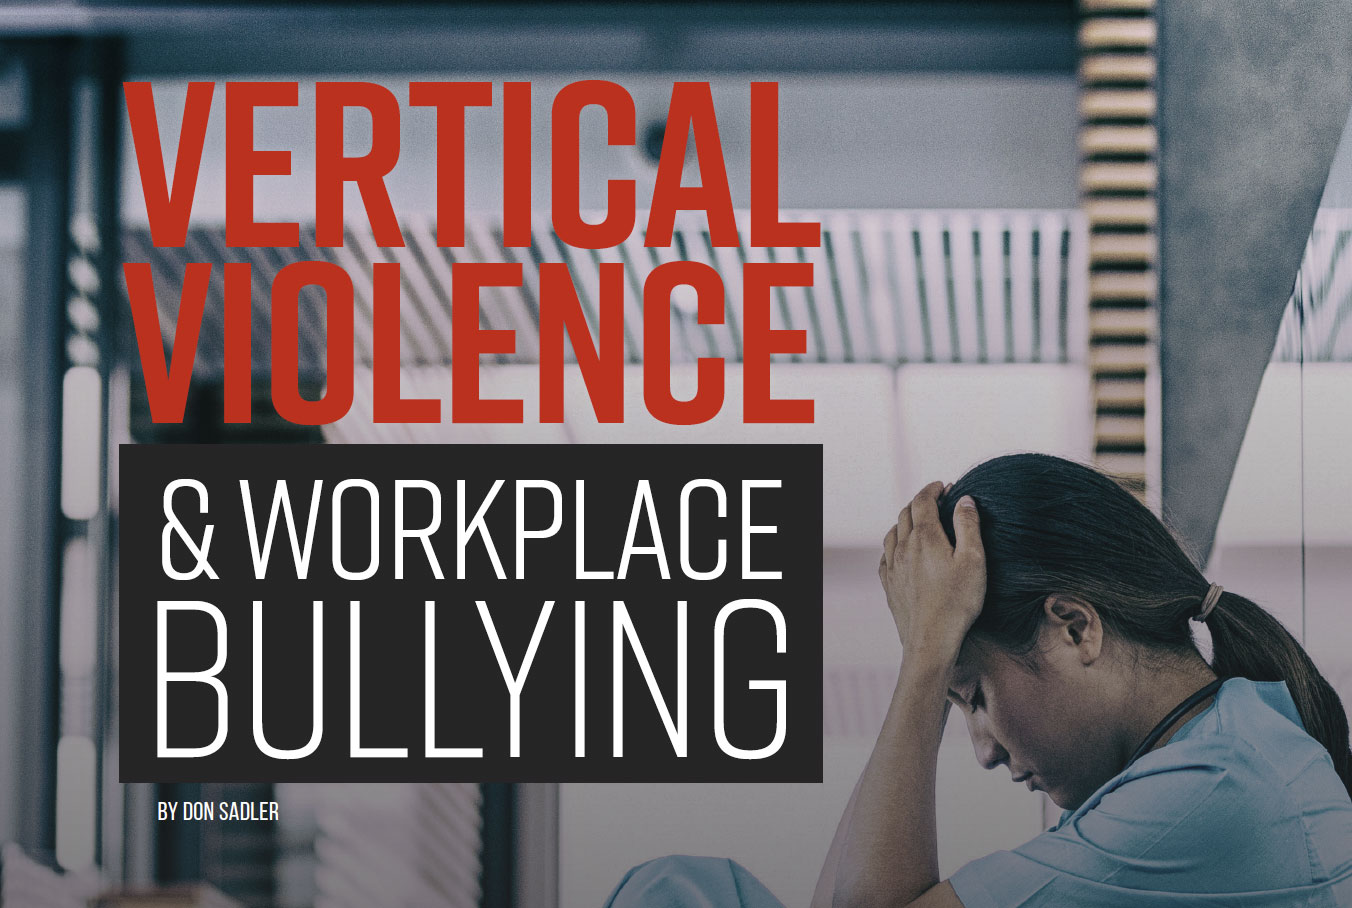 Vertical Violence & Workplace Bullying